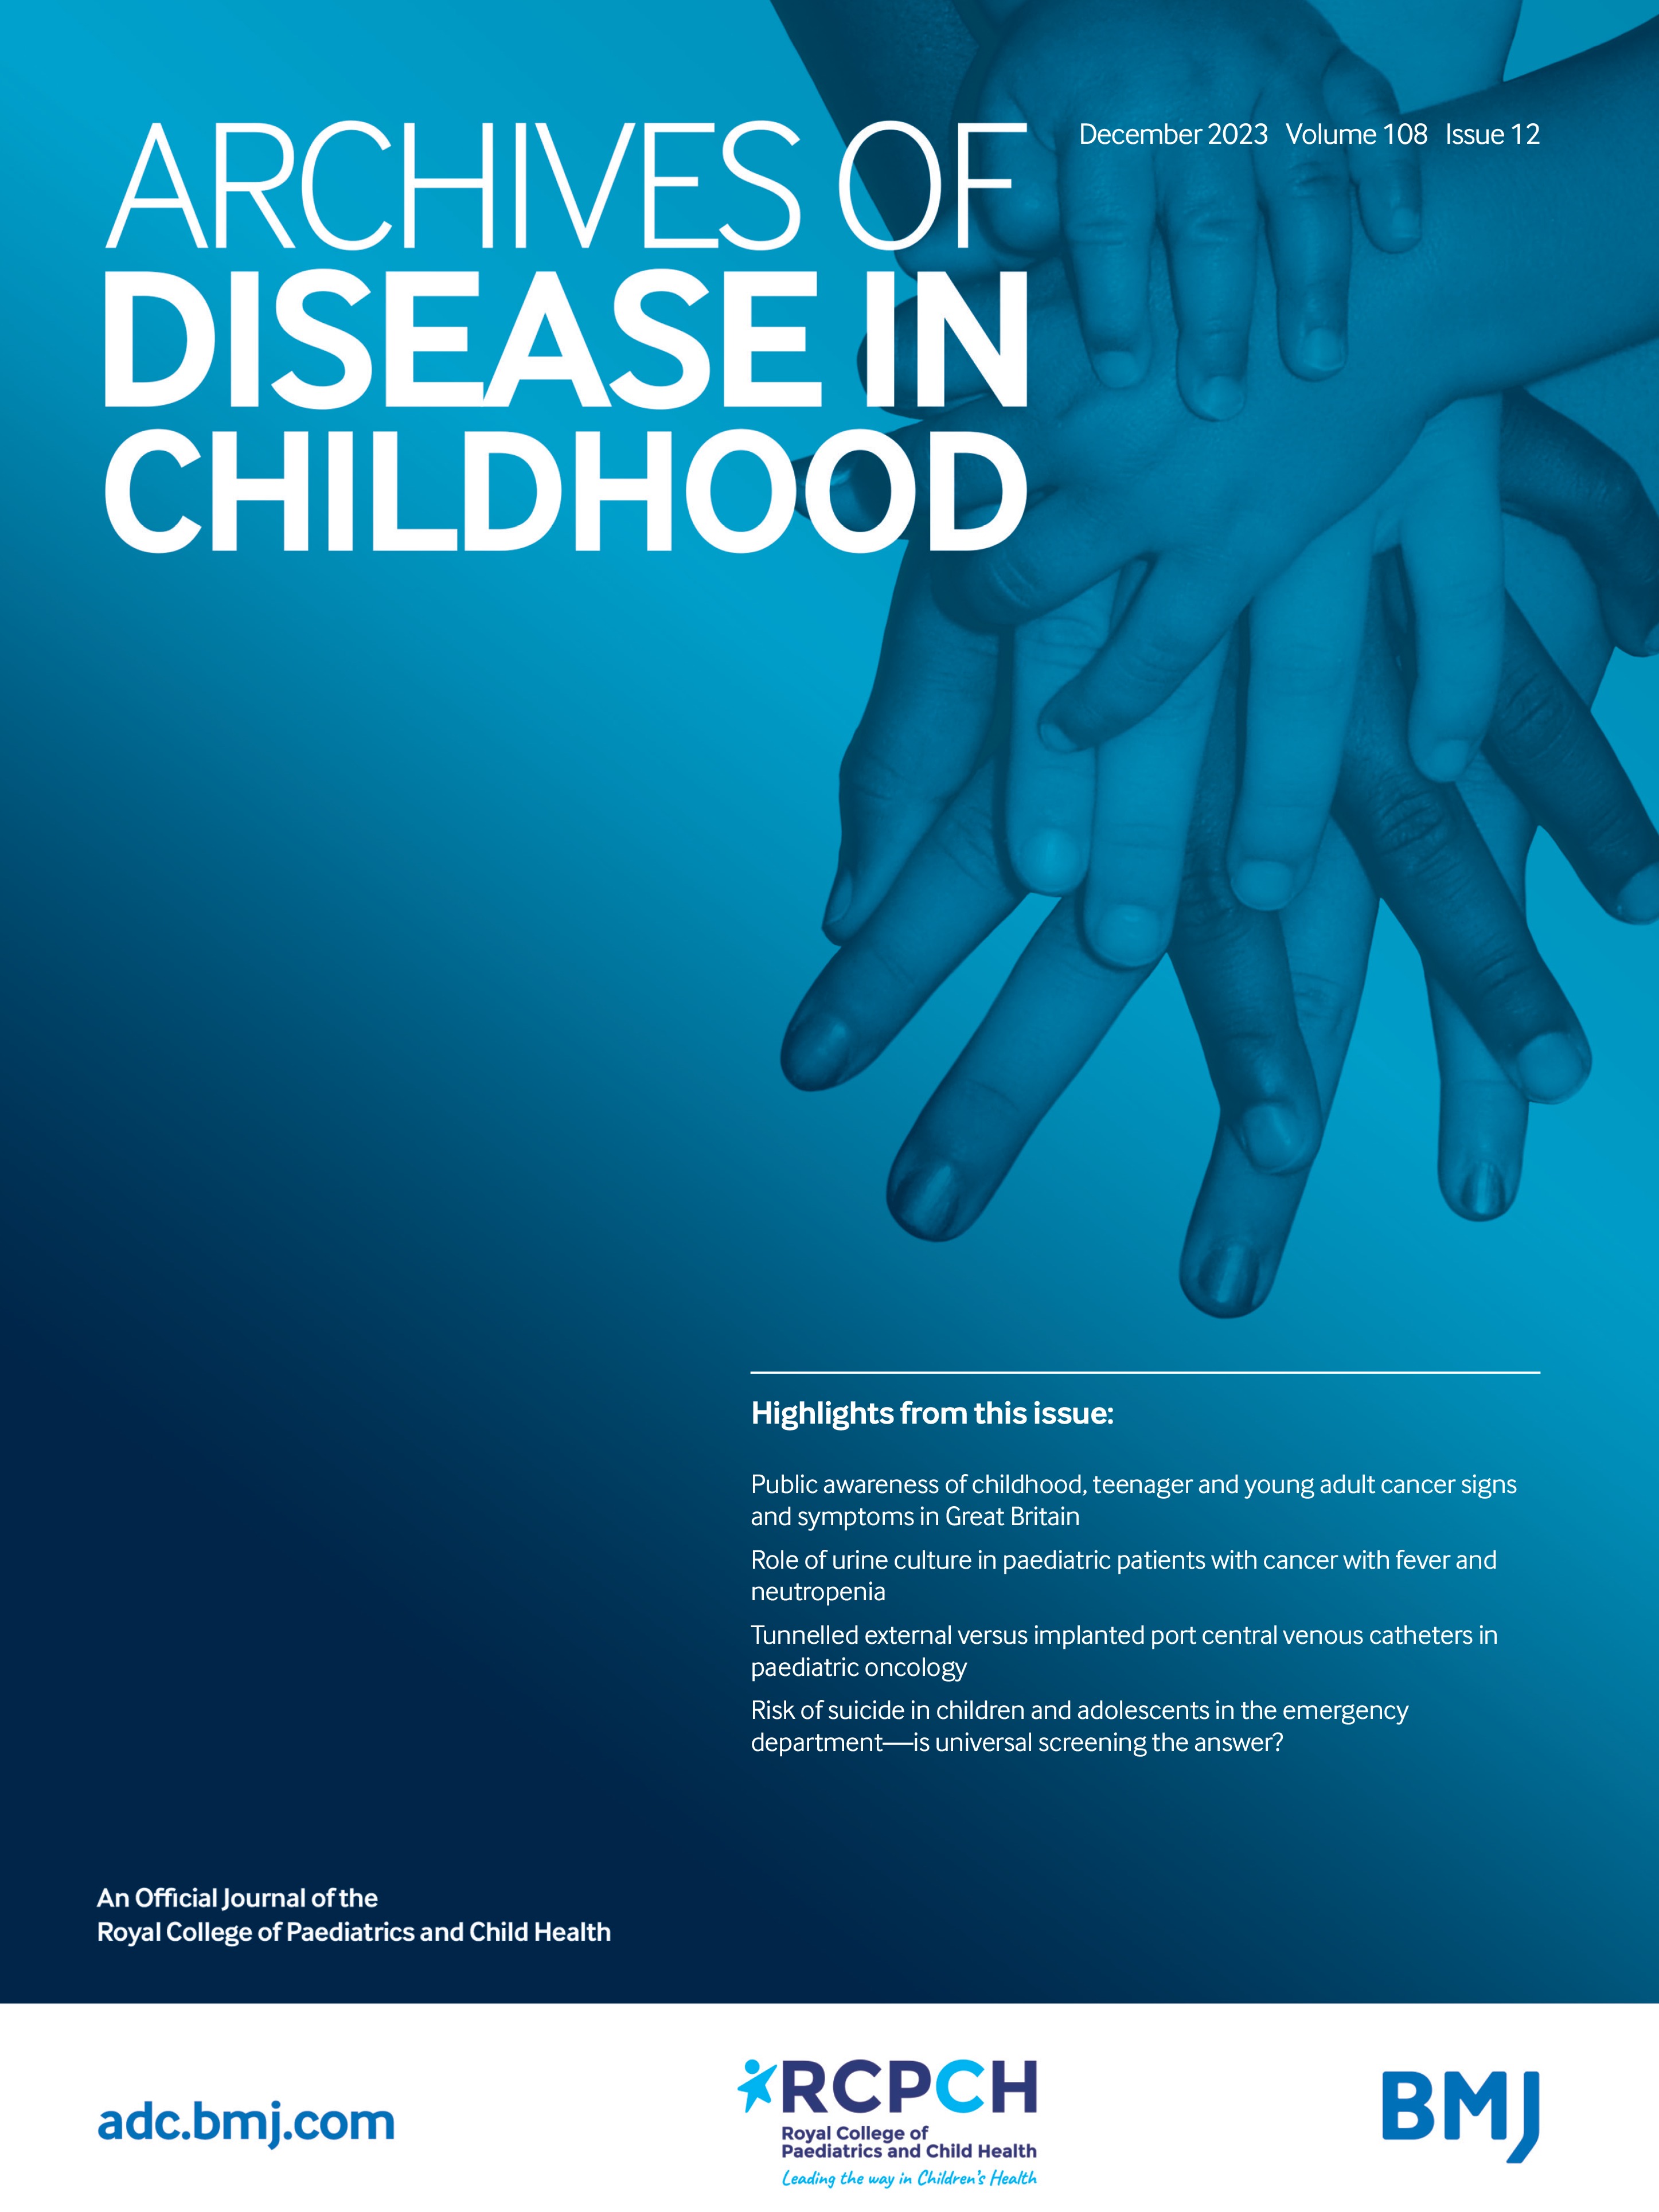 Variation in access and prescription of vedolizumab and ustekinumab in paediatric patients with inflammatory bowel disease: a UK-wide study